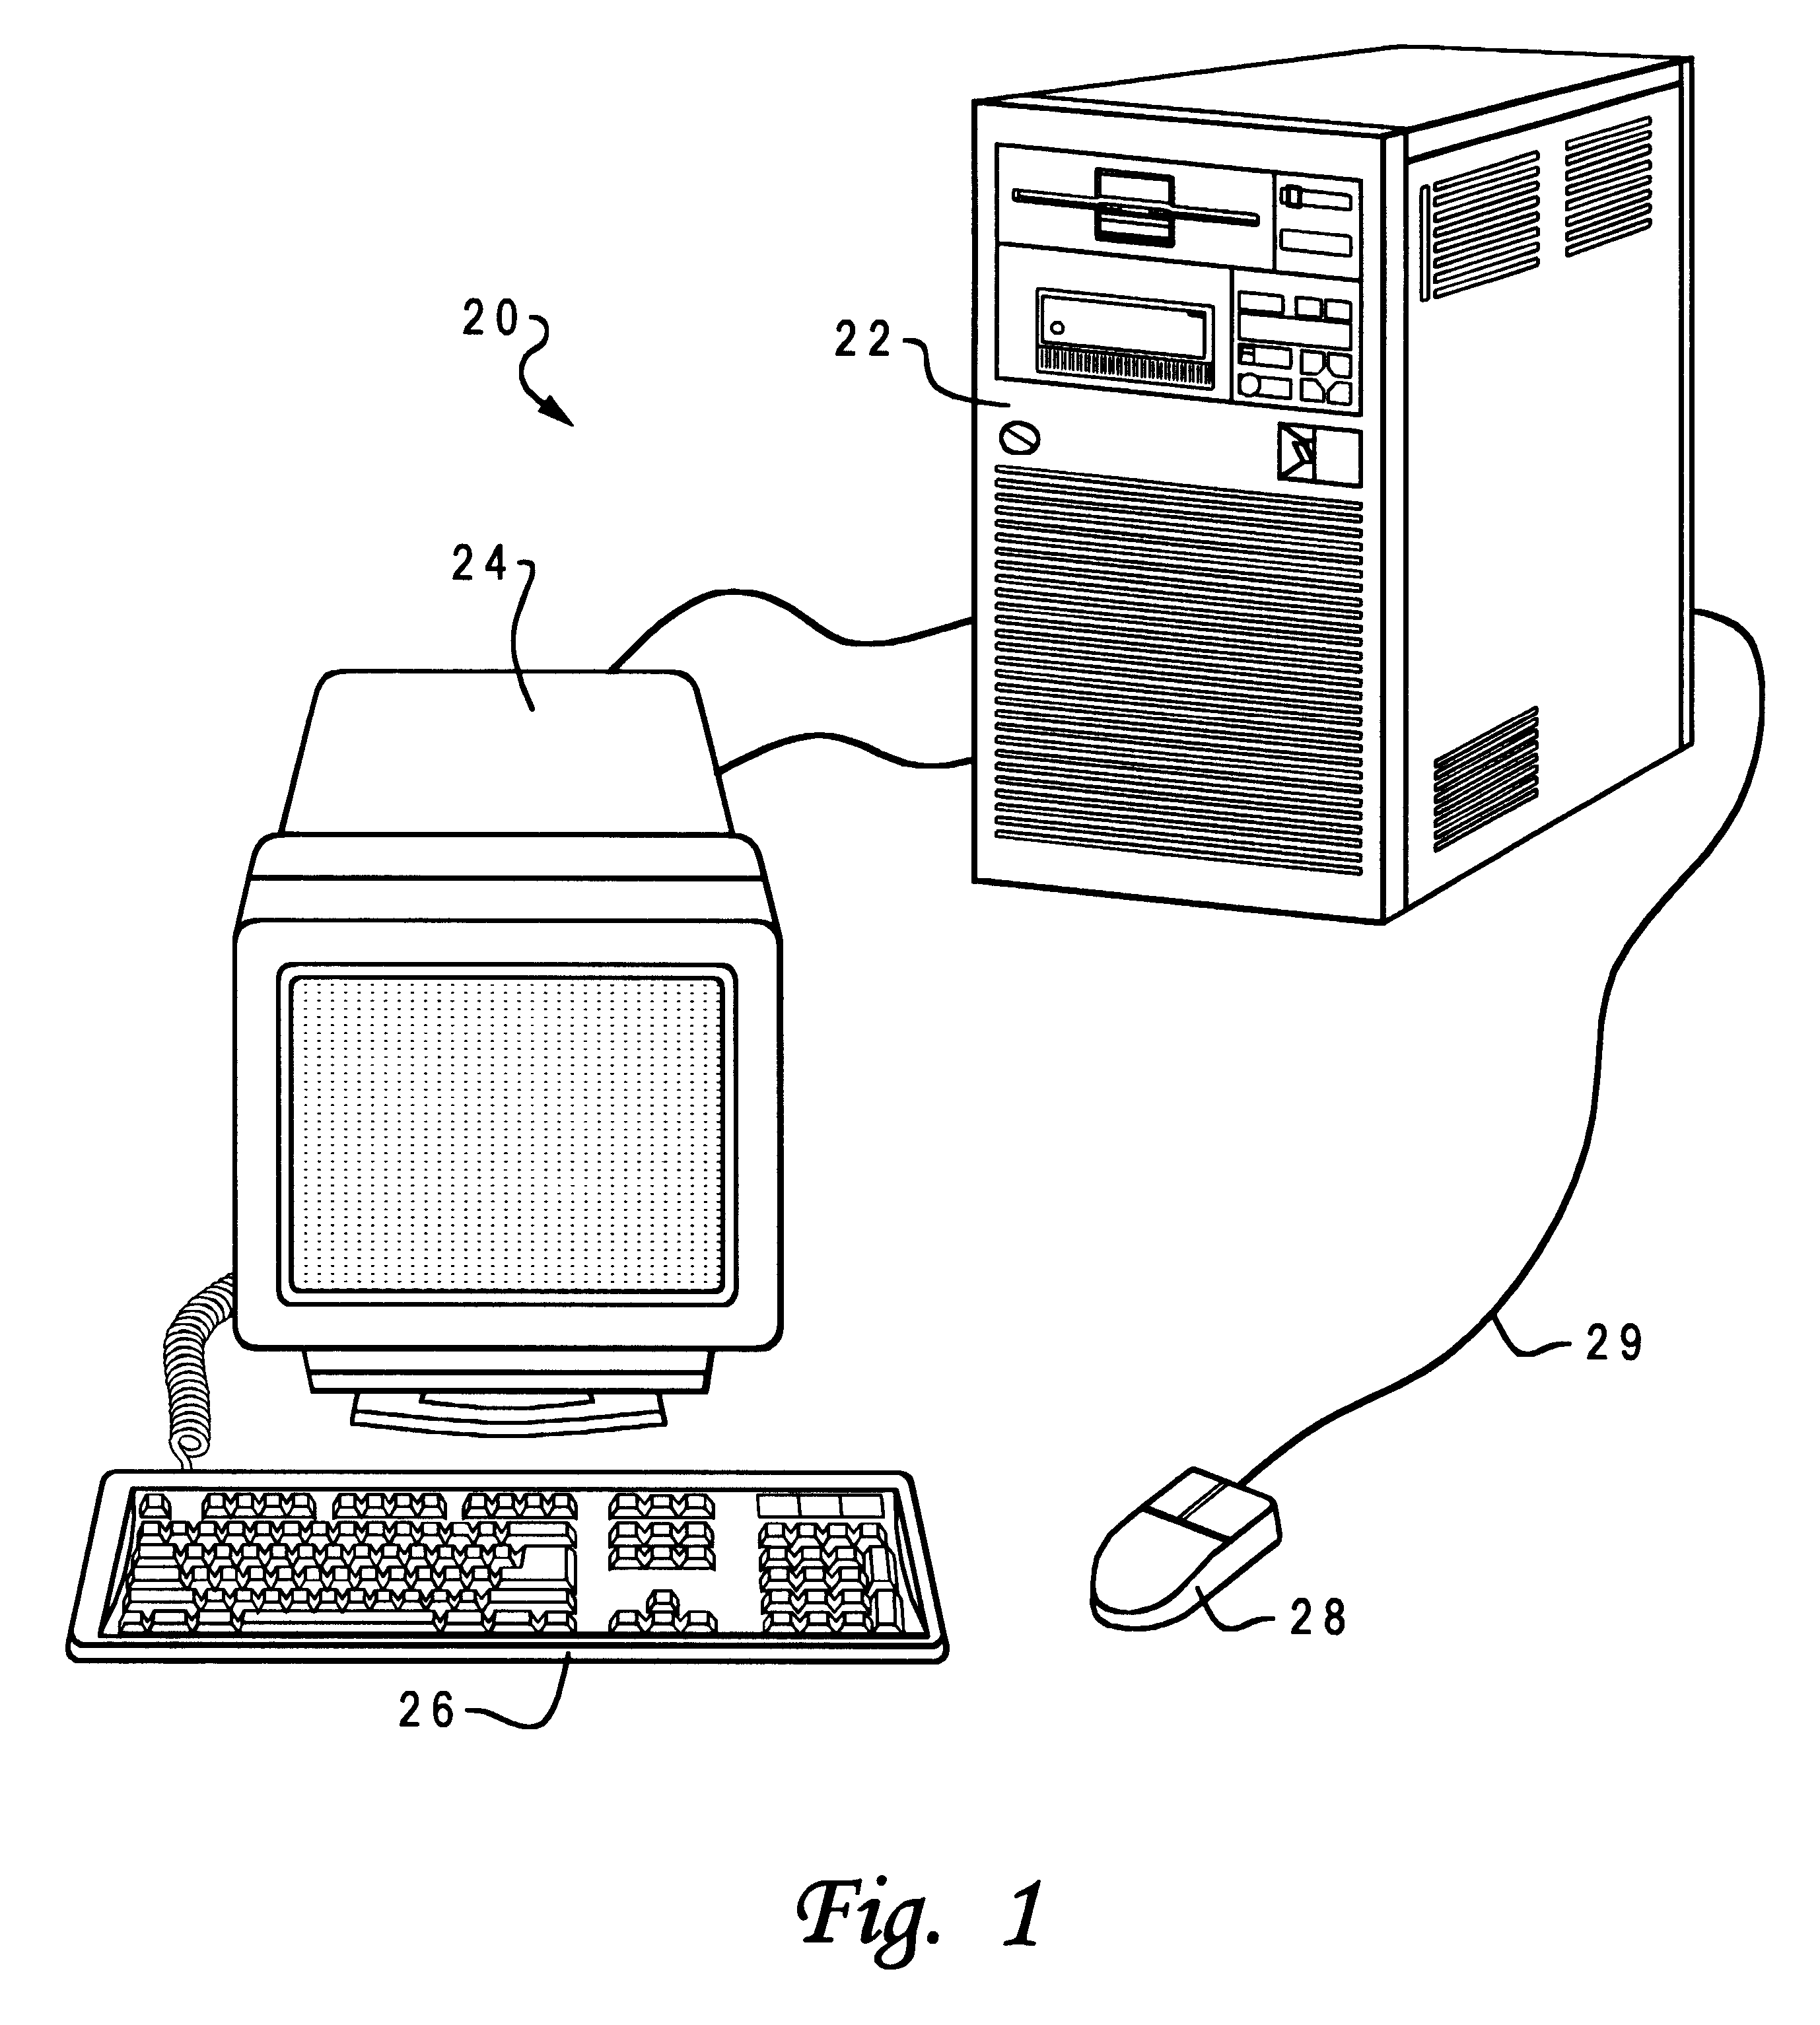 Method and system for the automatic initiation of power application and start-up activities in a computer system